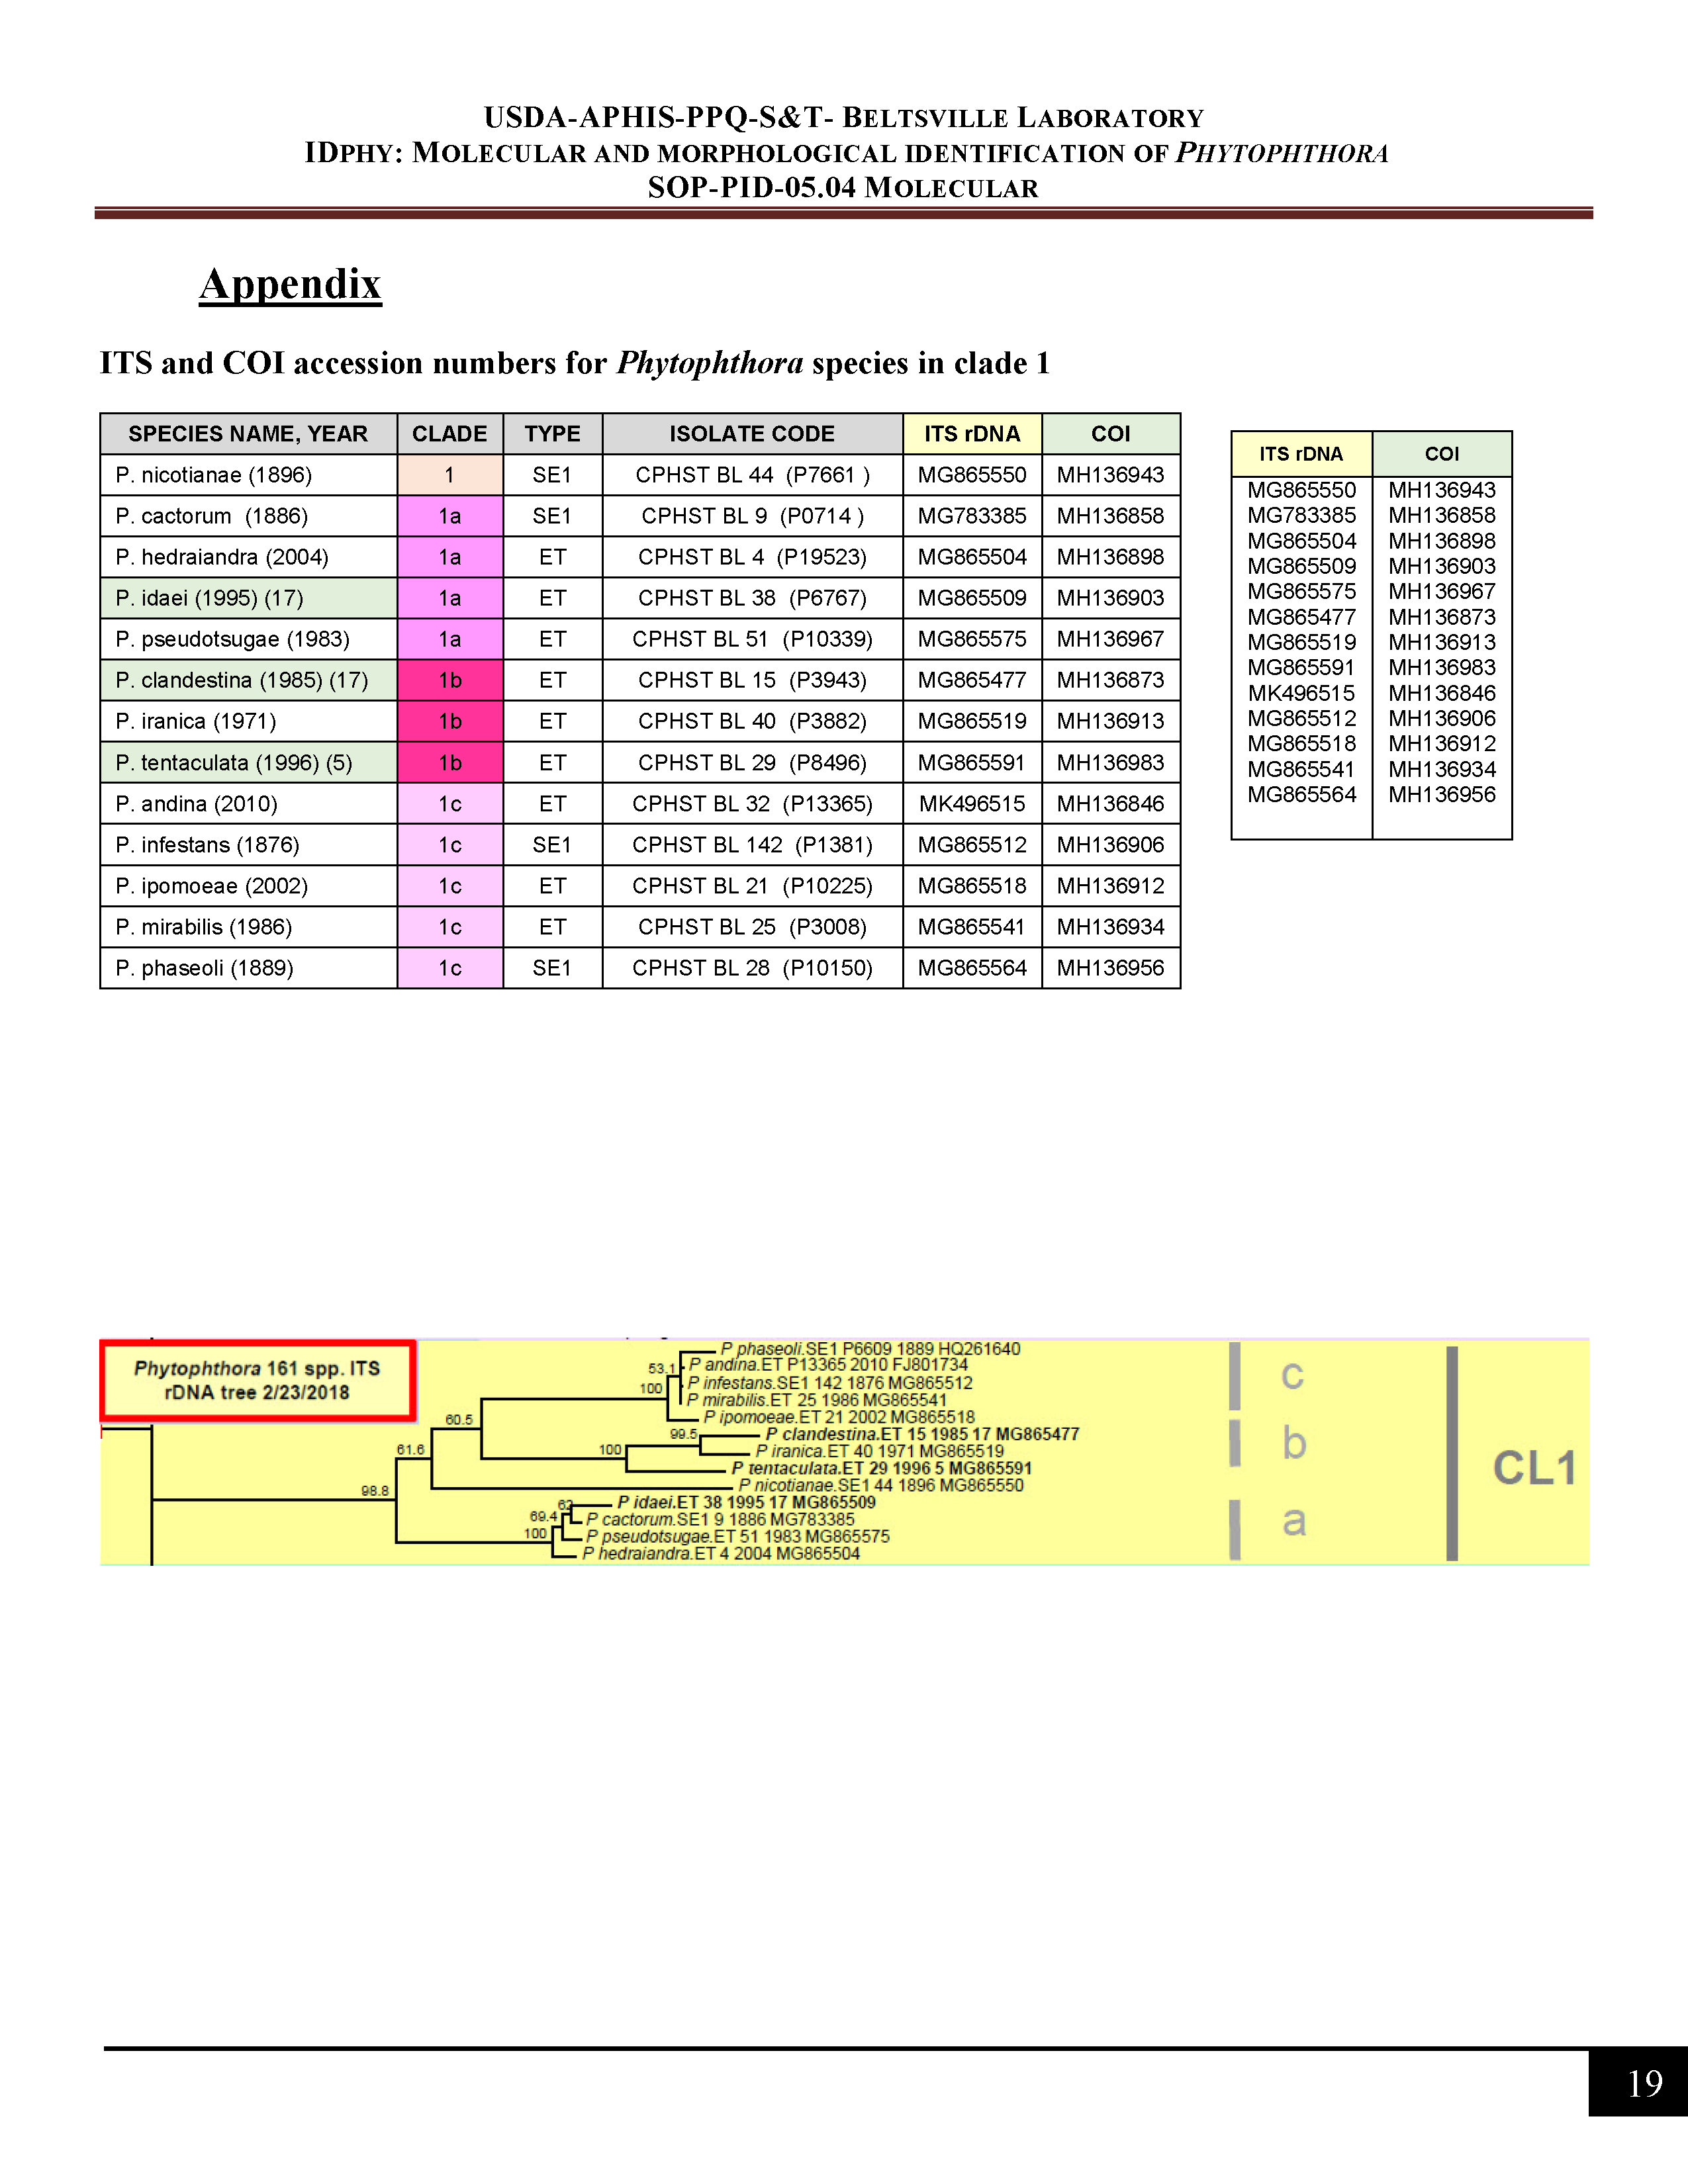 ITS and COI accession numbers for <em>Phytophthora</em> species in clade 1